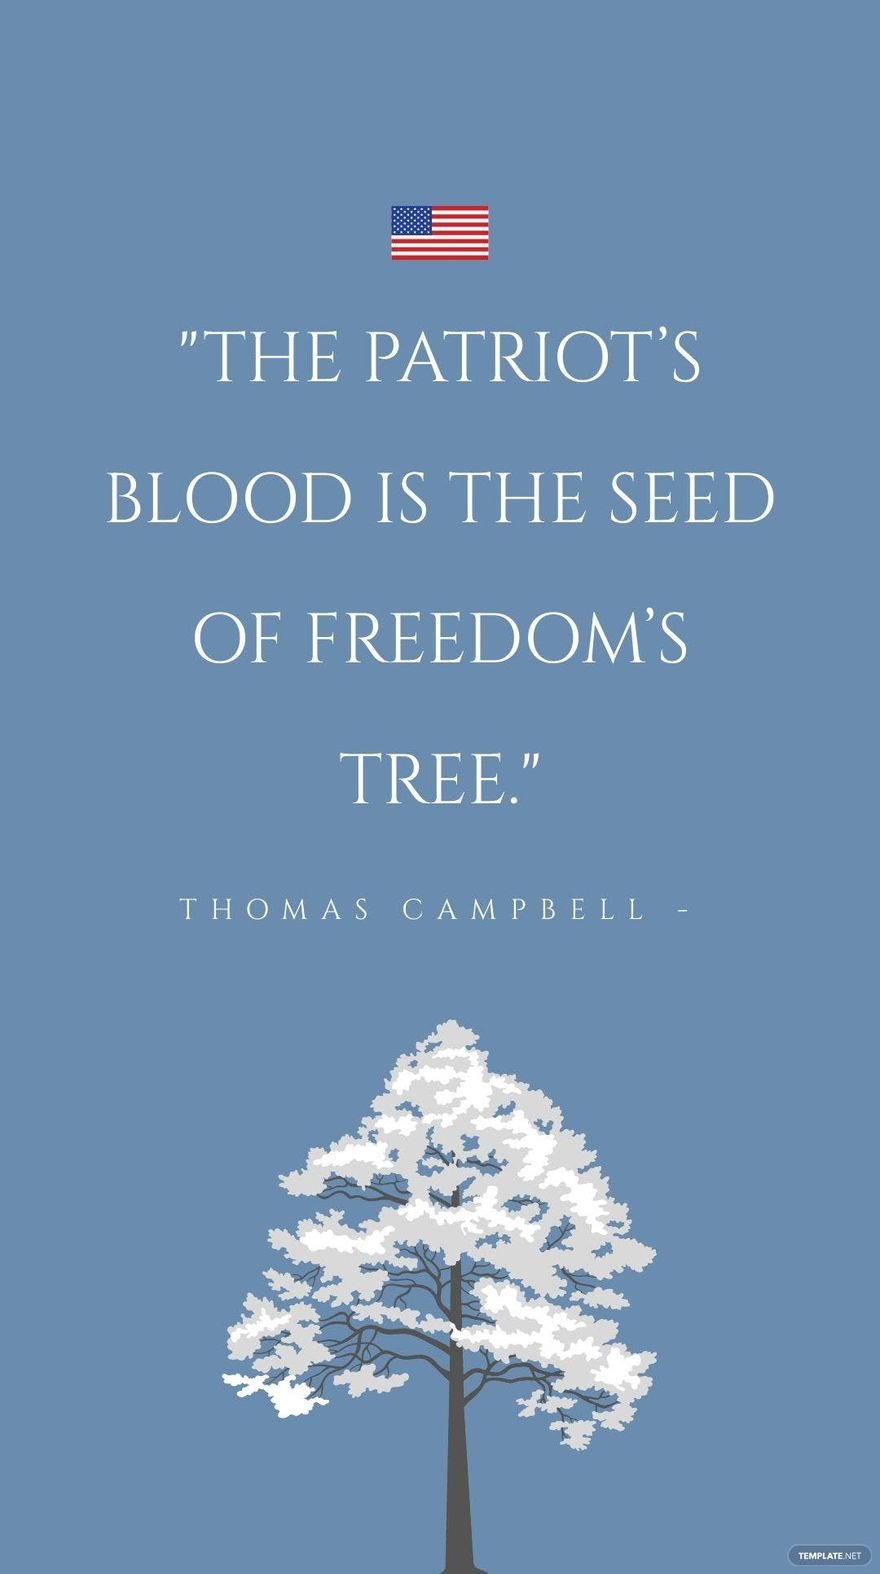 Free Thomas Campbell - The patriot’s blood is the seed of freedom’s tree. in JPG